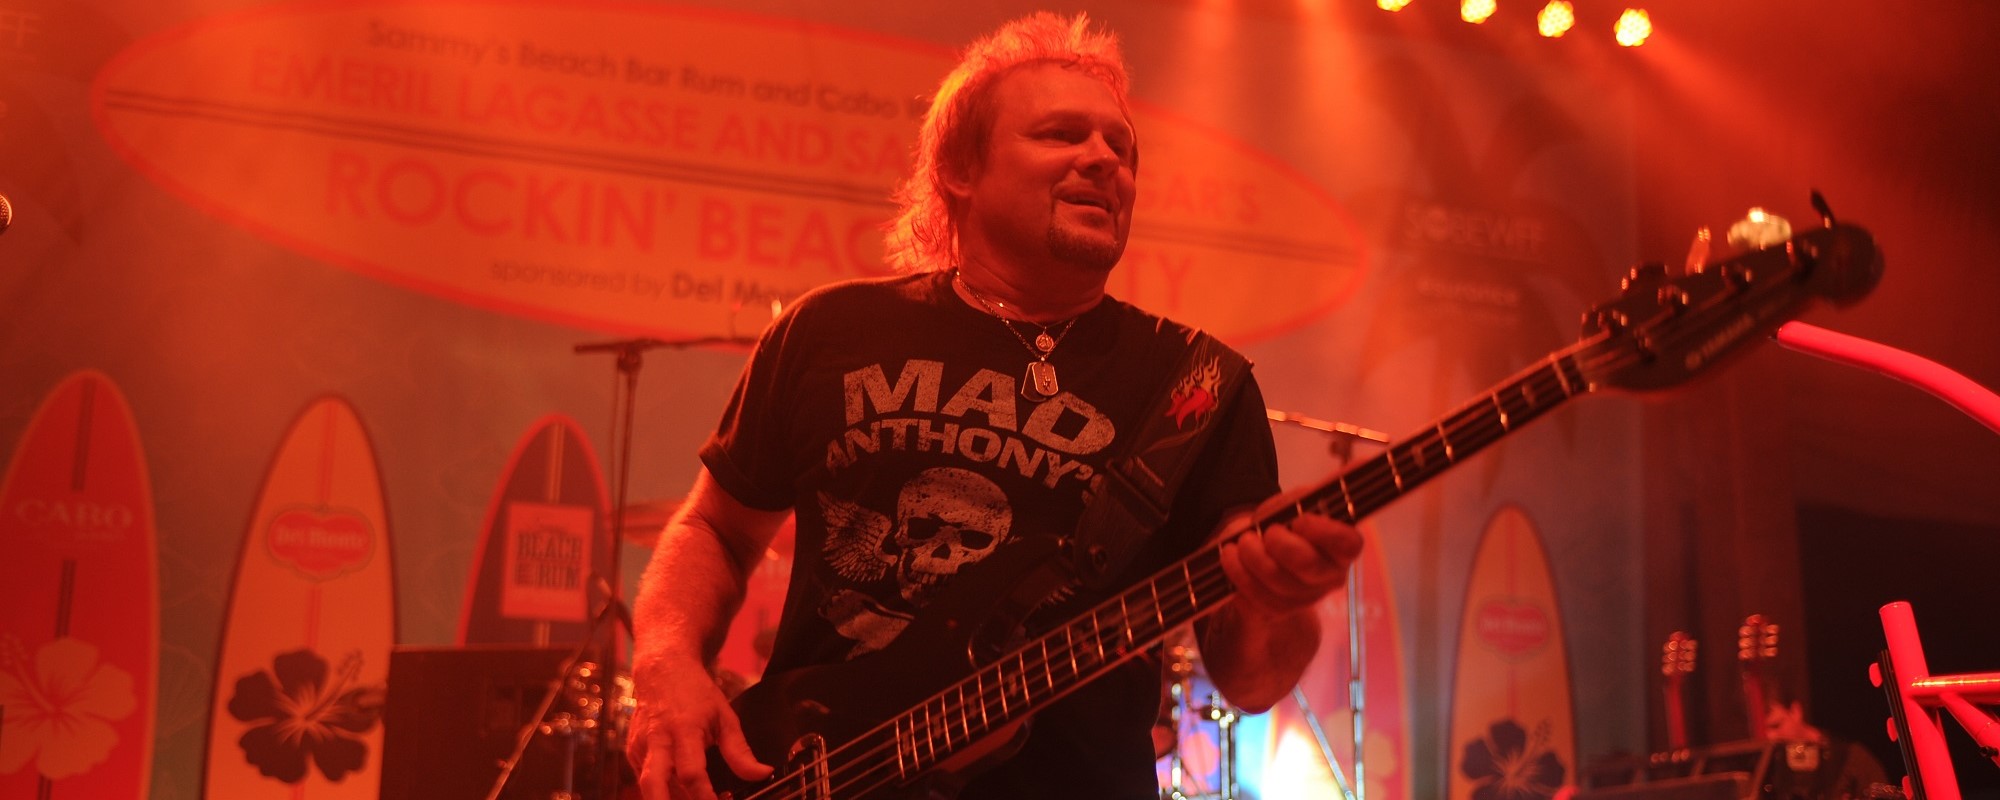 4 Classic Van Halen Songs Showcasing Michael Anthony’s Backing Vocals in Honor of the Bassist’s 70th Birthday